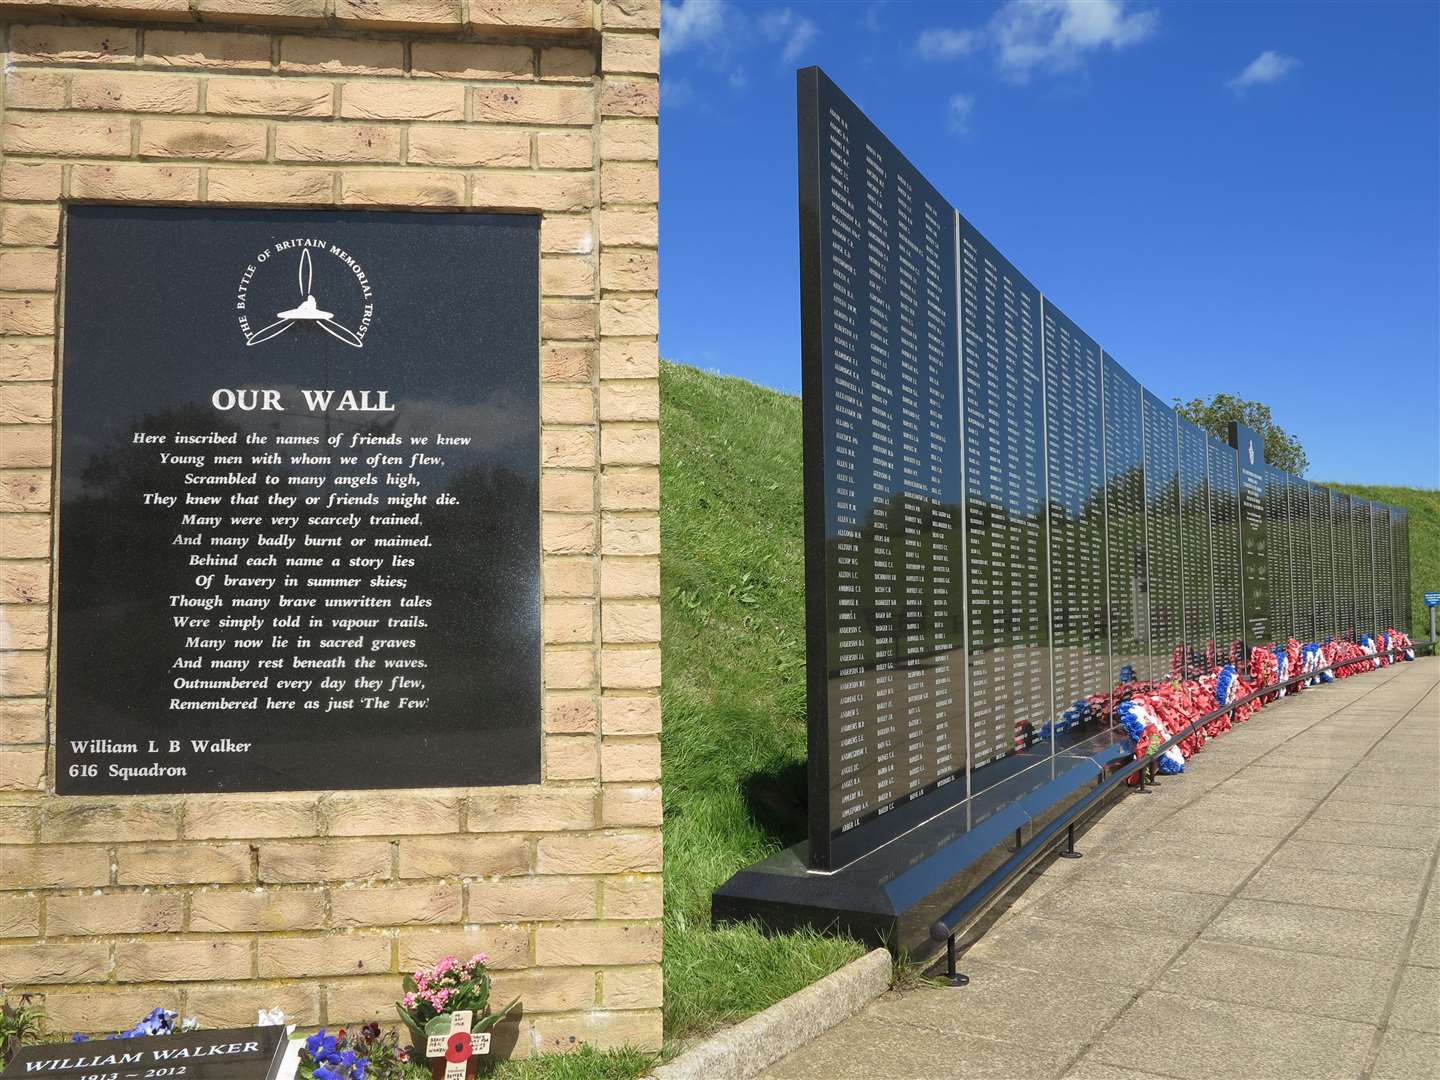 A public appeal has been launched to help keep the Battle of Britain Memorial at Capel-le-Ferne, just outside Folkestone, afloat